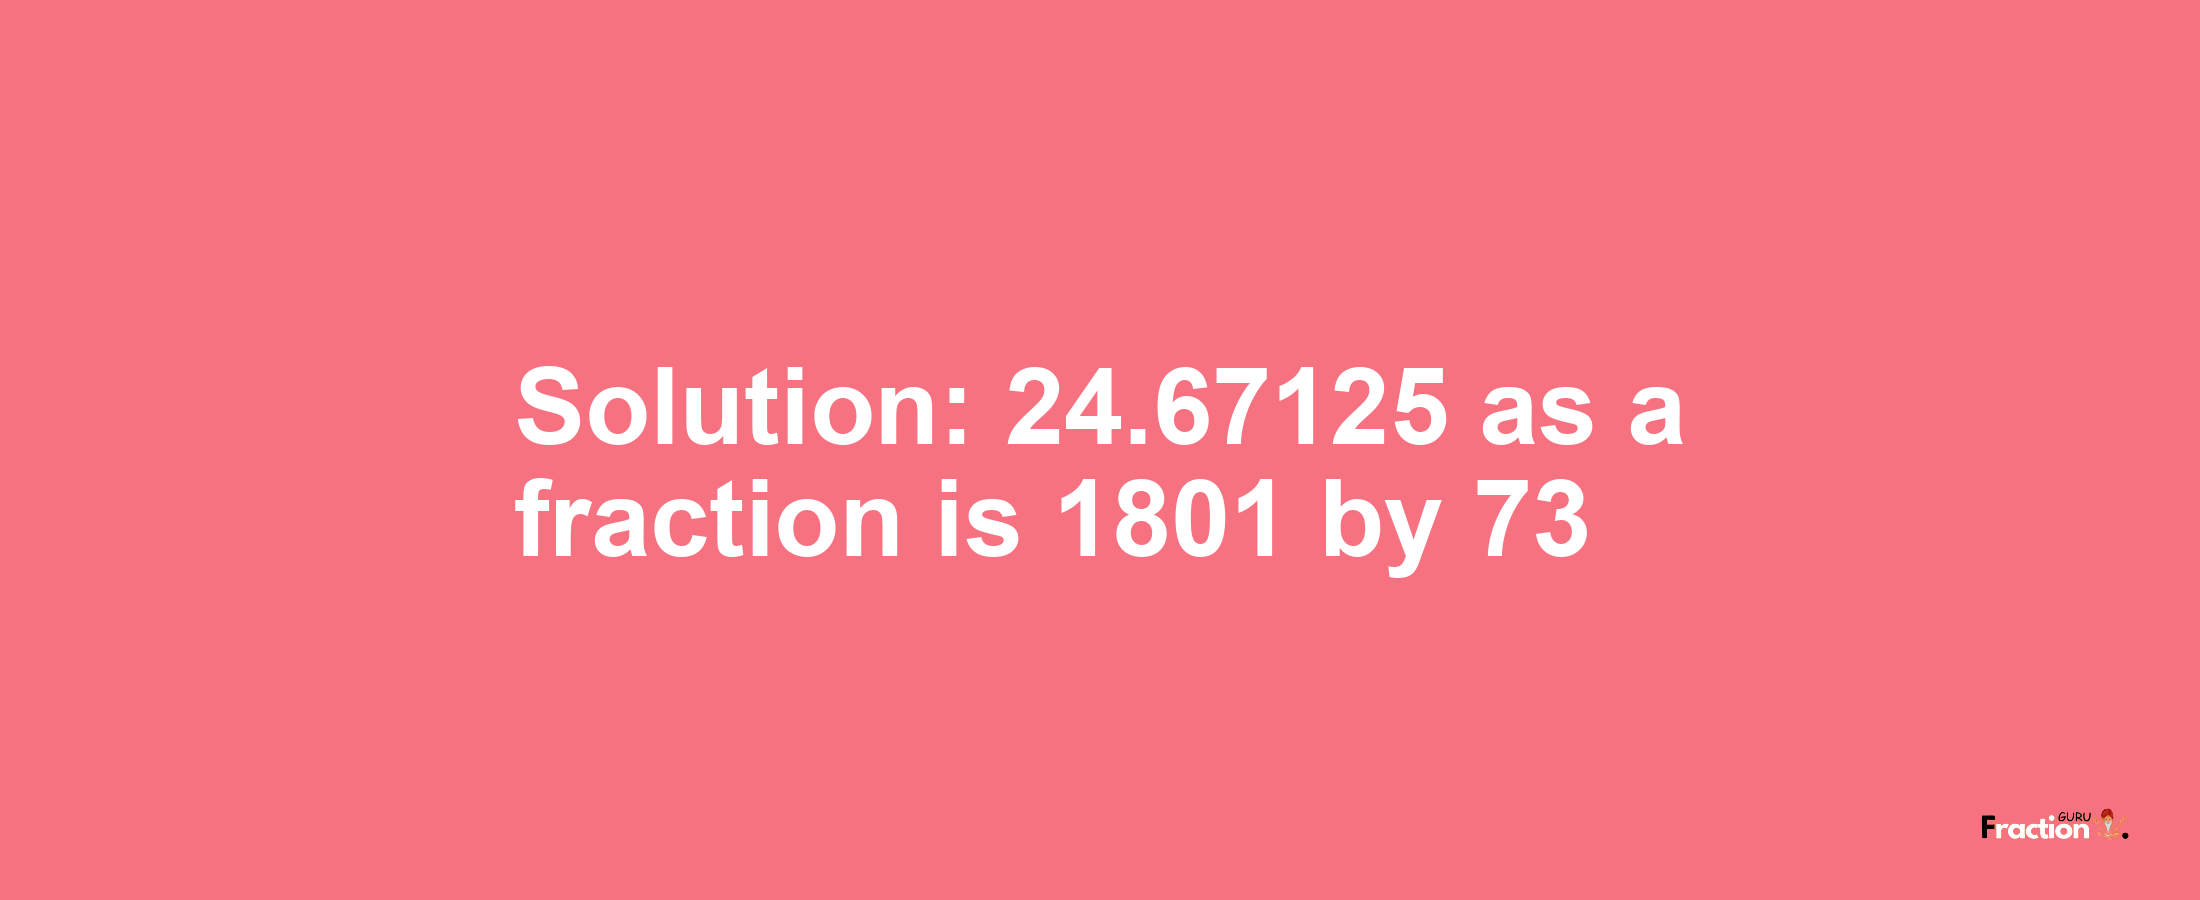 Solution:24.67125 as a fraction is 1801/73